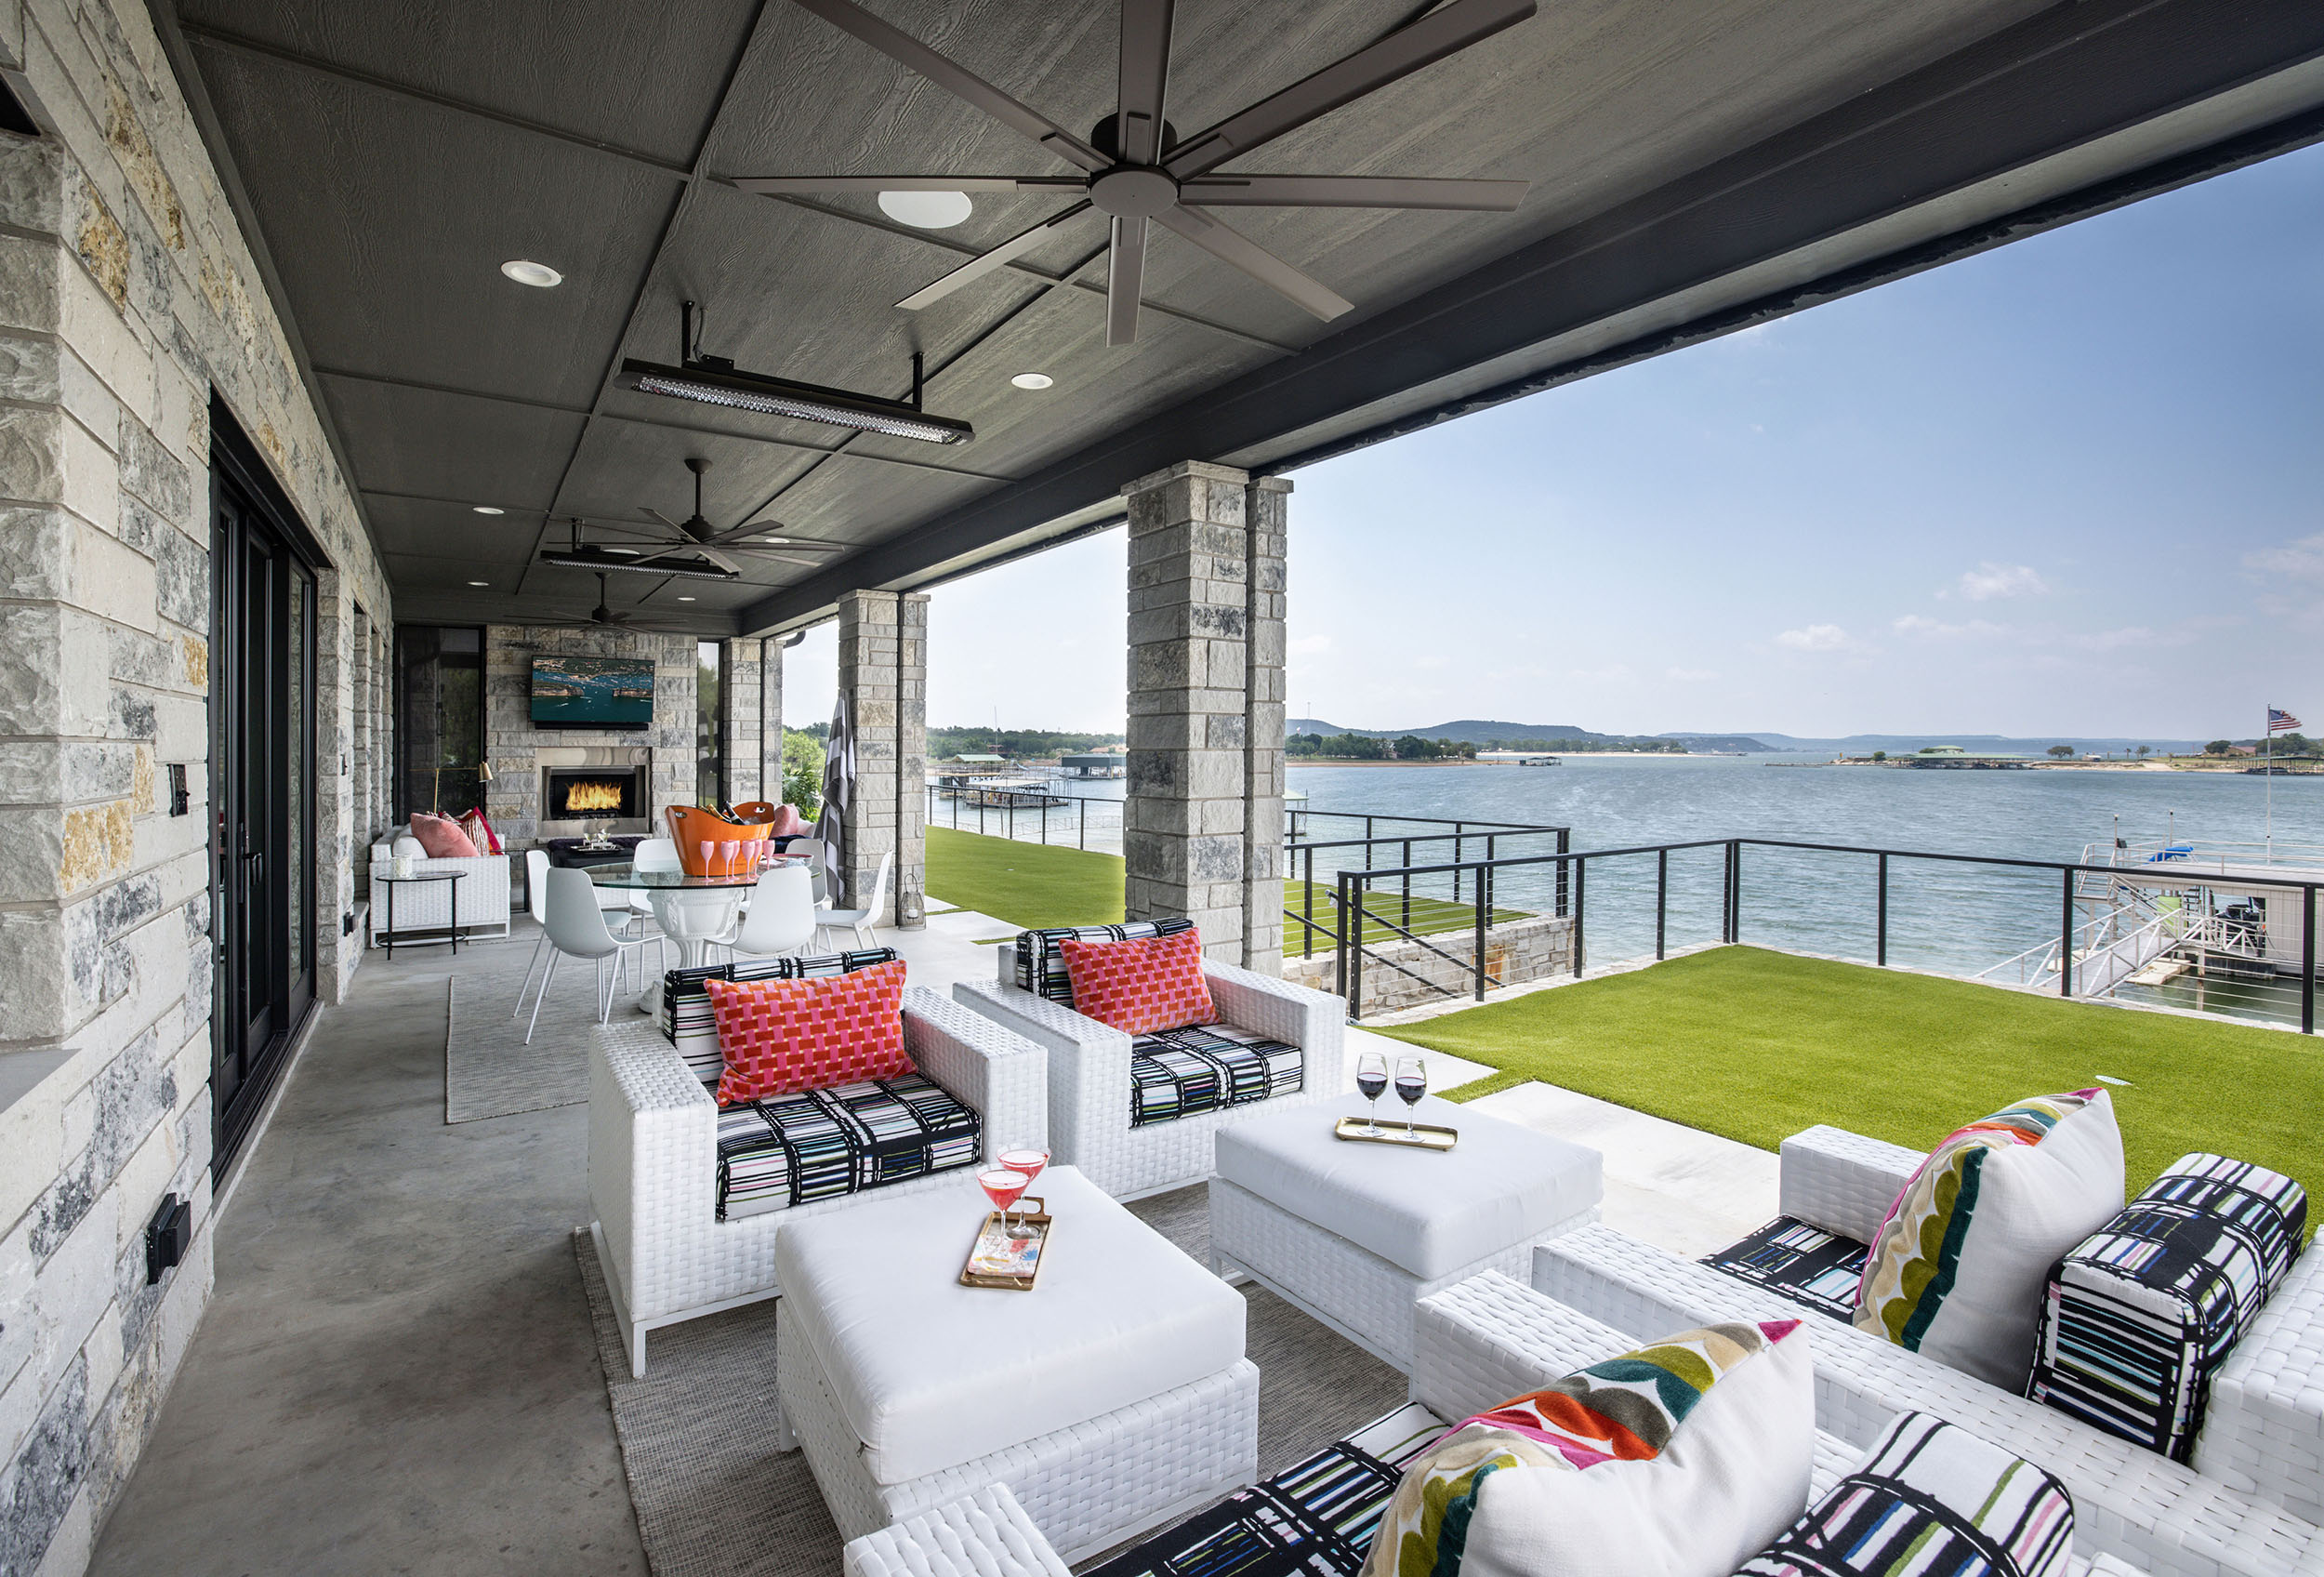 Lake house_Outdoor patio area with custom floorplan and furniture in whole home renovation in second home vacation property in Possum Kingdom Lake Texas